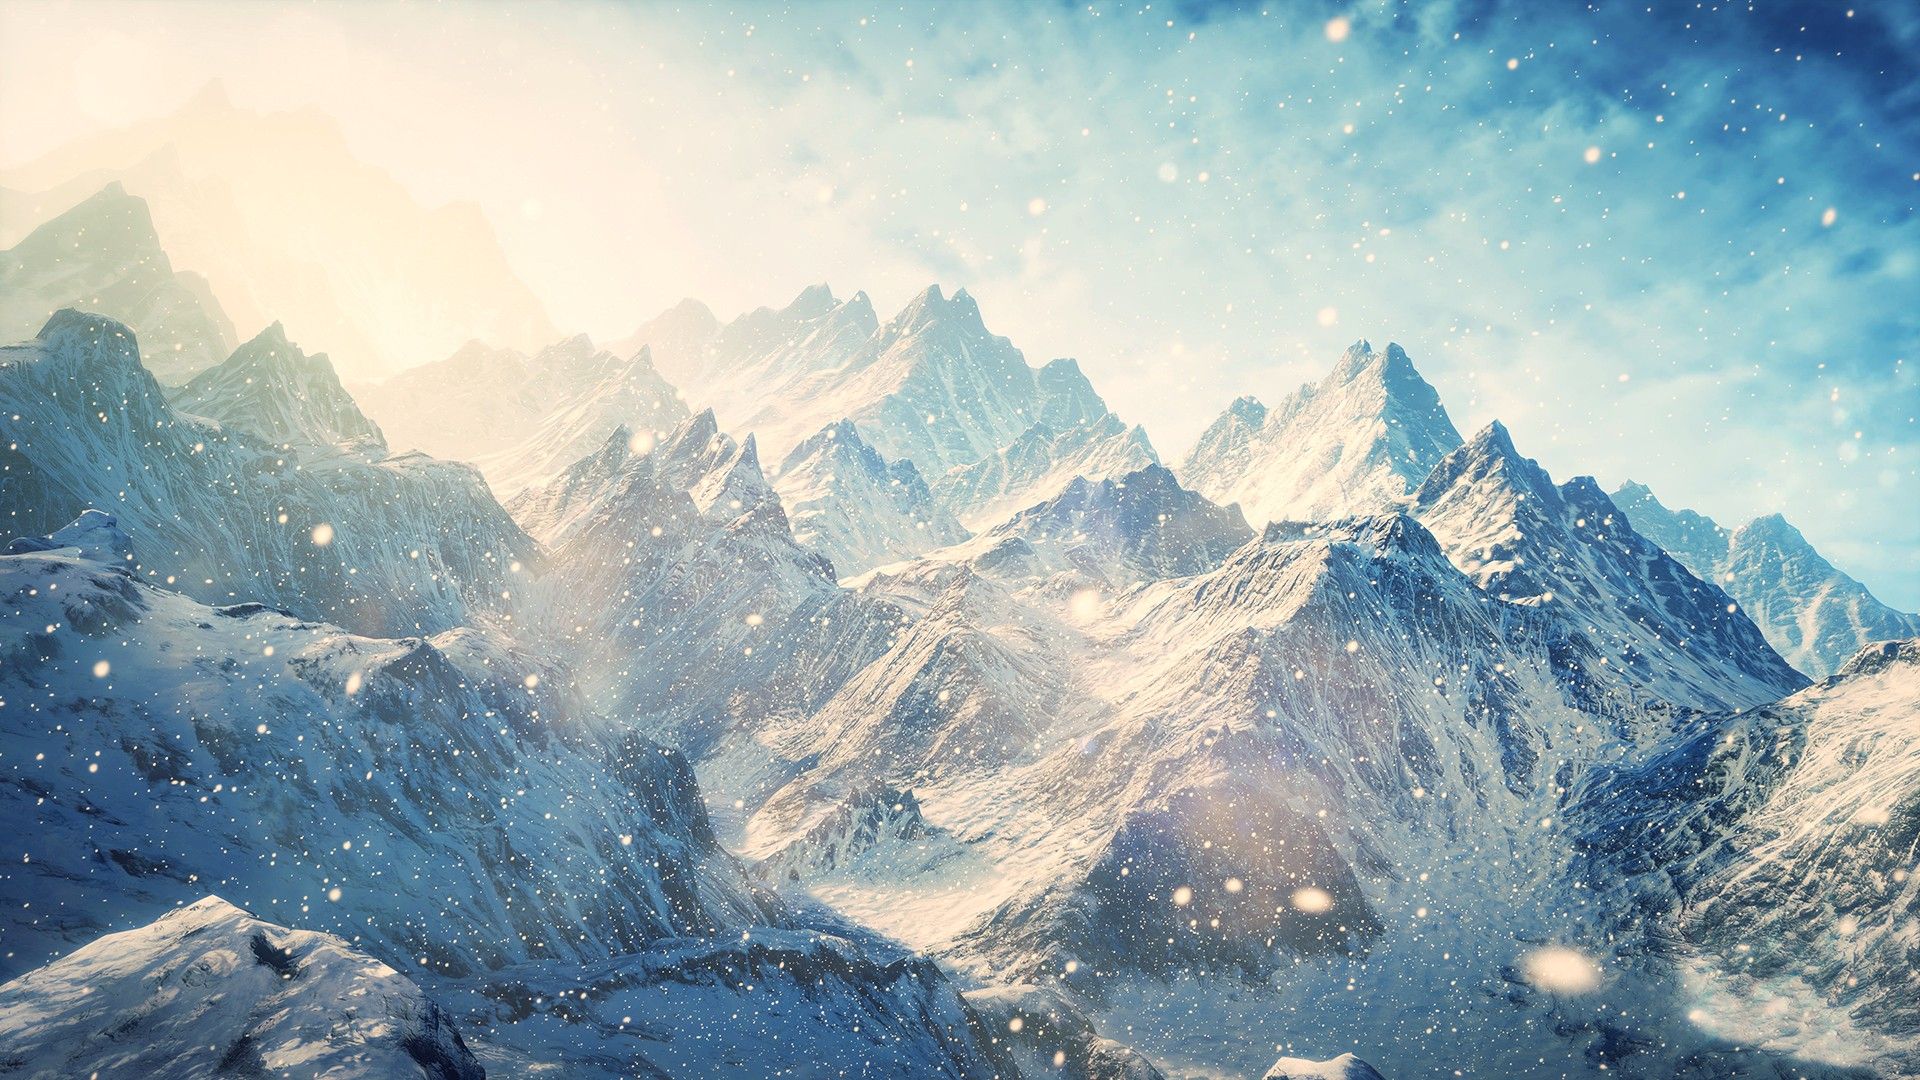 Mountains With Snow HD Wallpaper FullHDWpp   Full HD Wallpapers